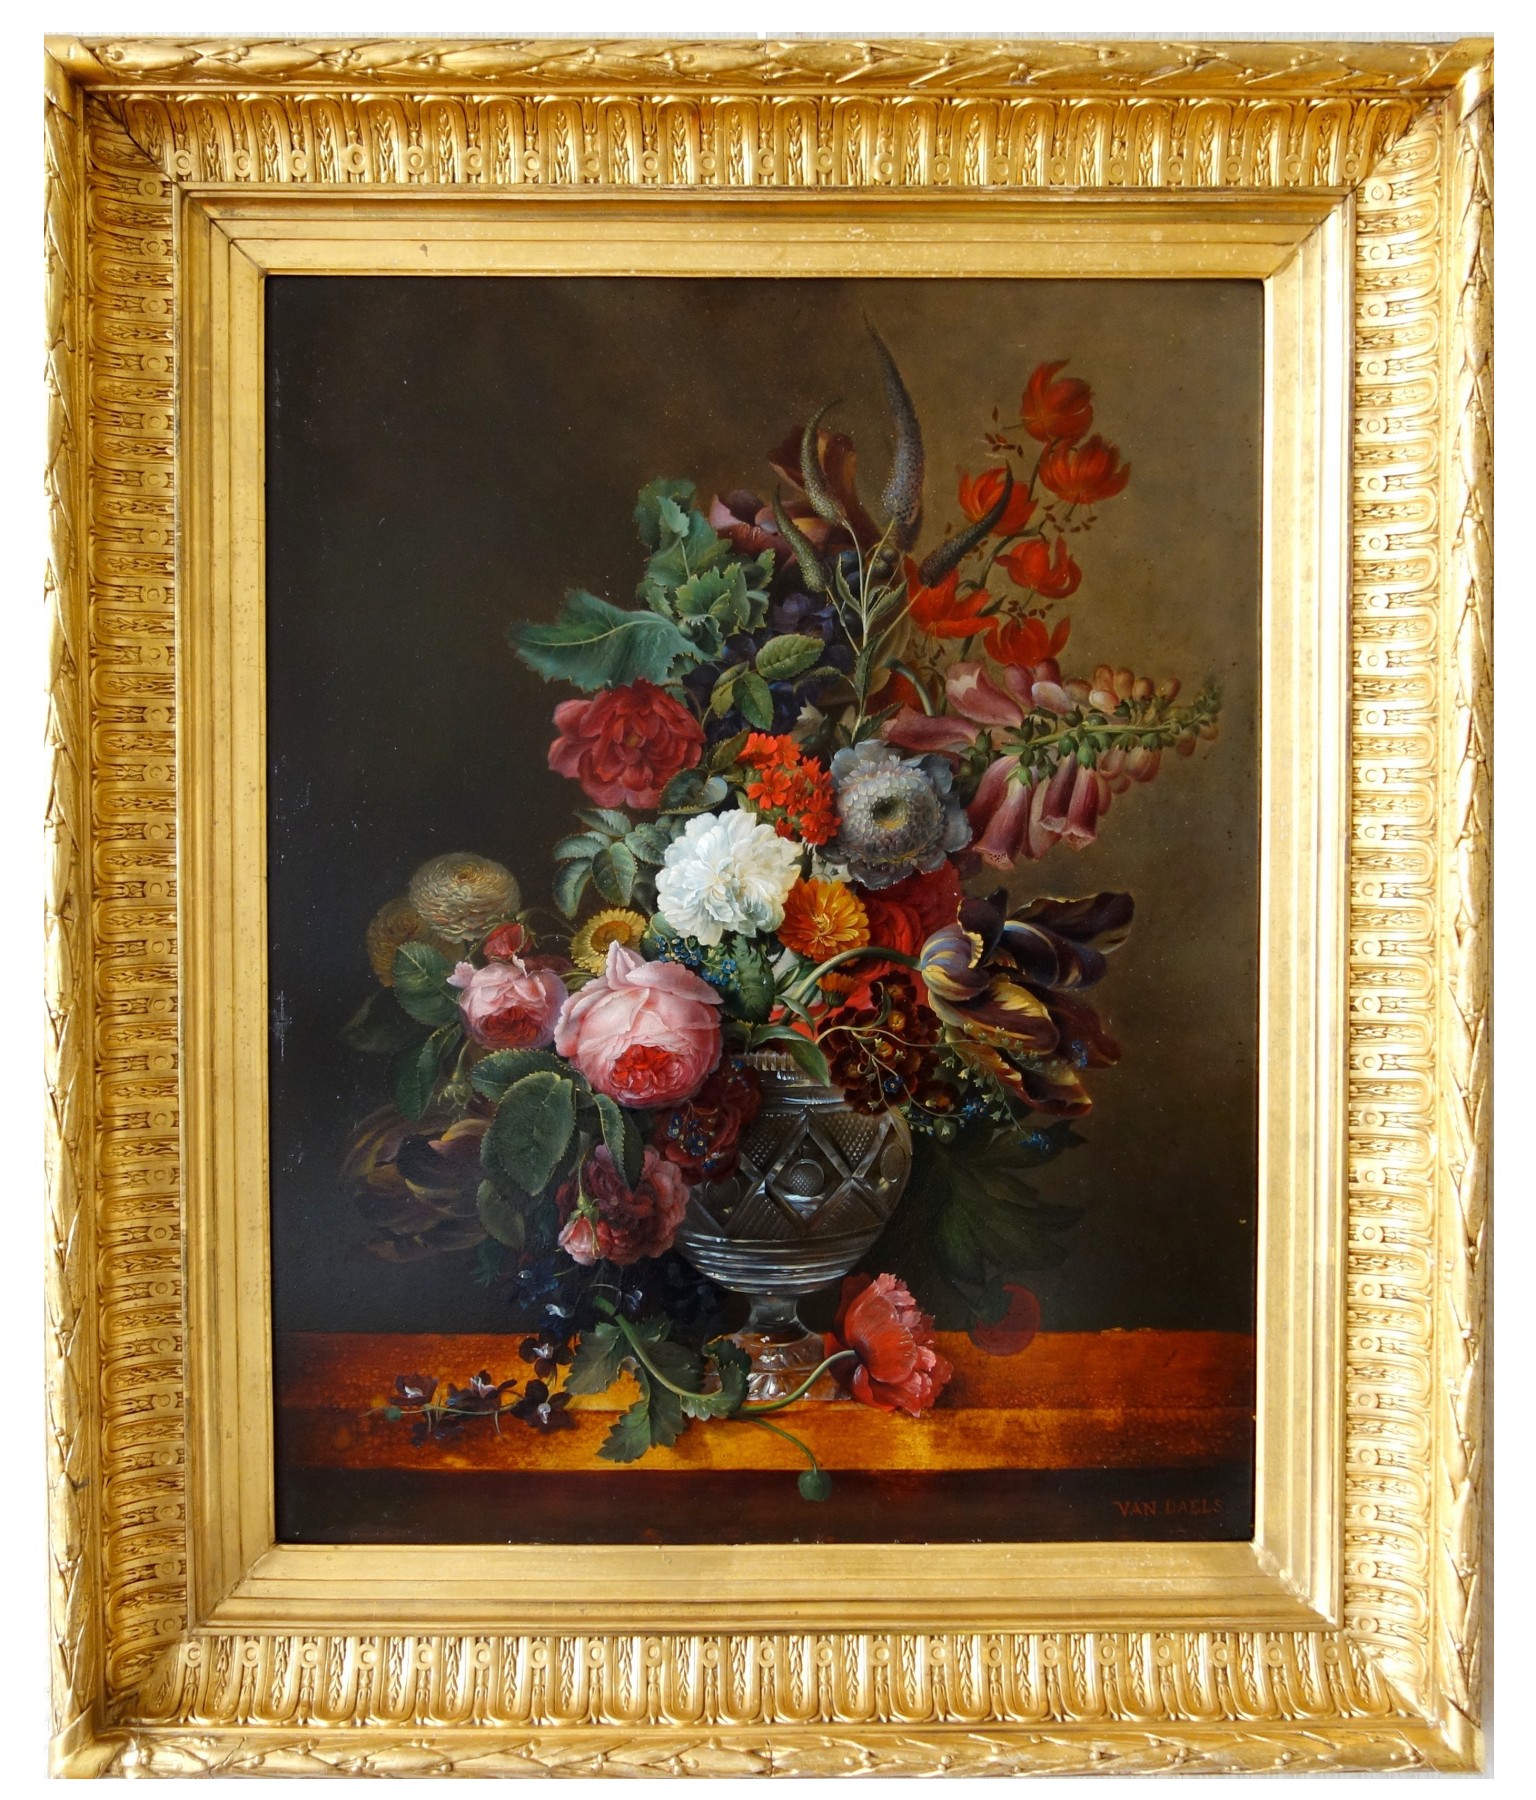 Bouquet of flowers - Early 19th century French school, follower of